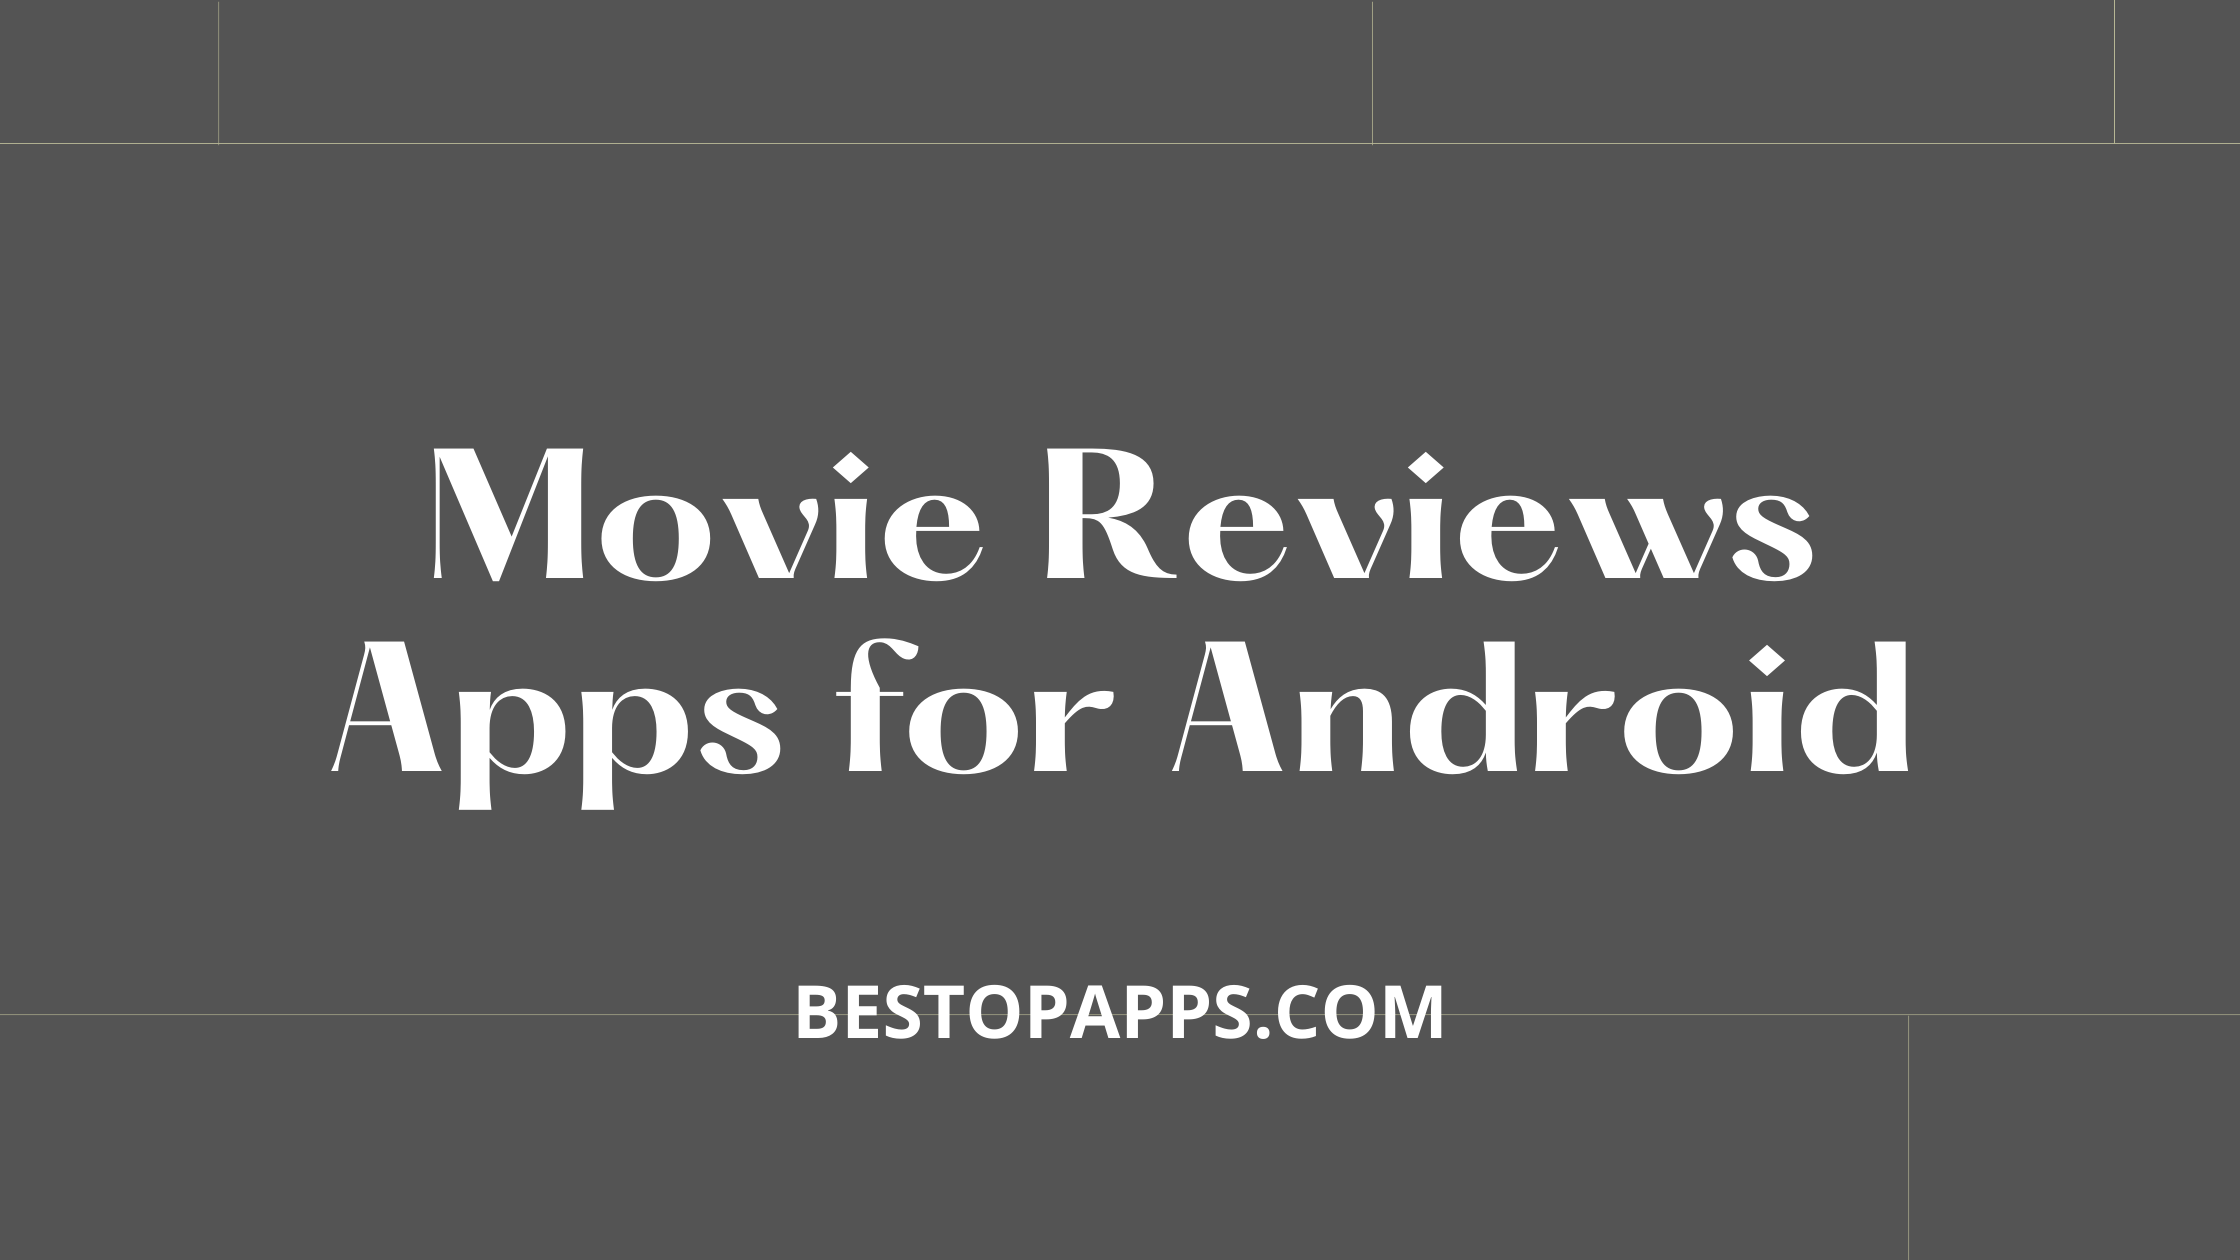 Movie Reviews Apps for Android